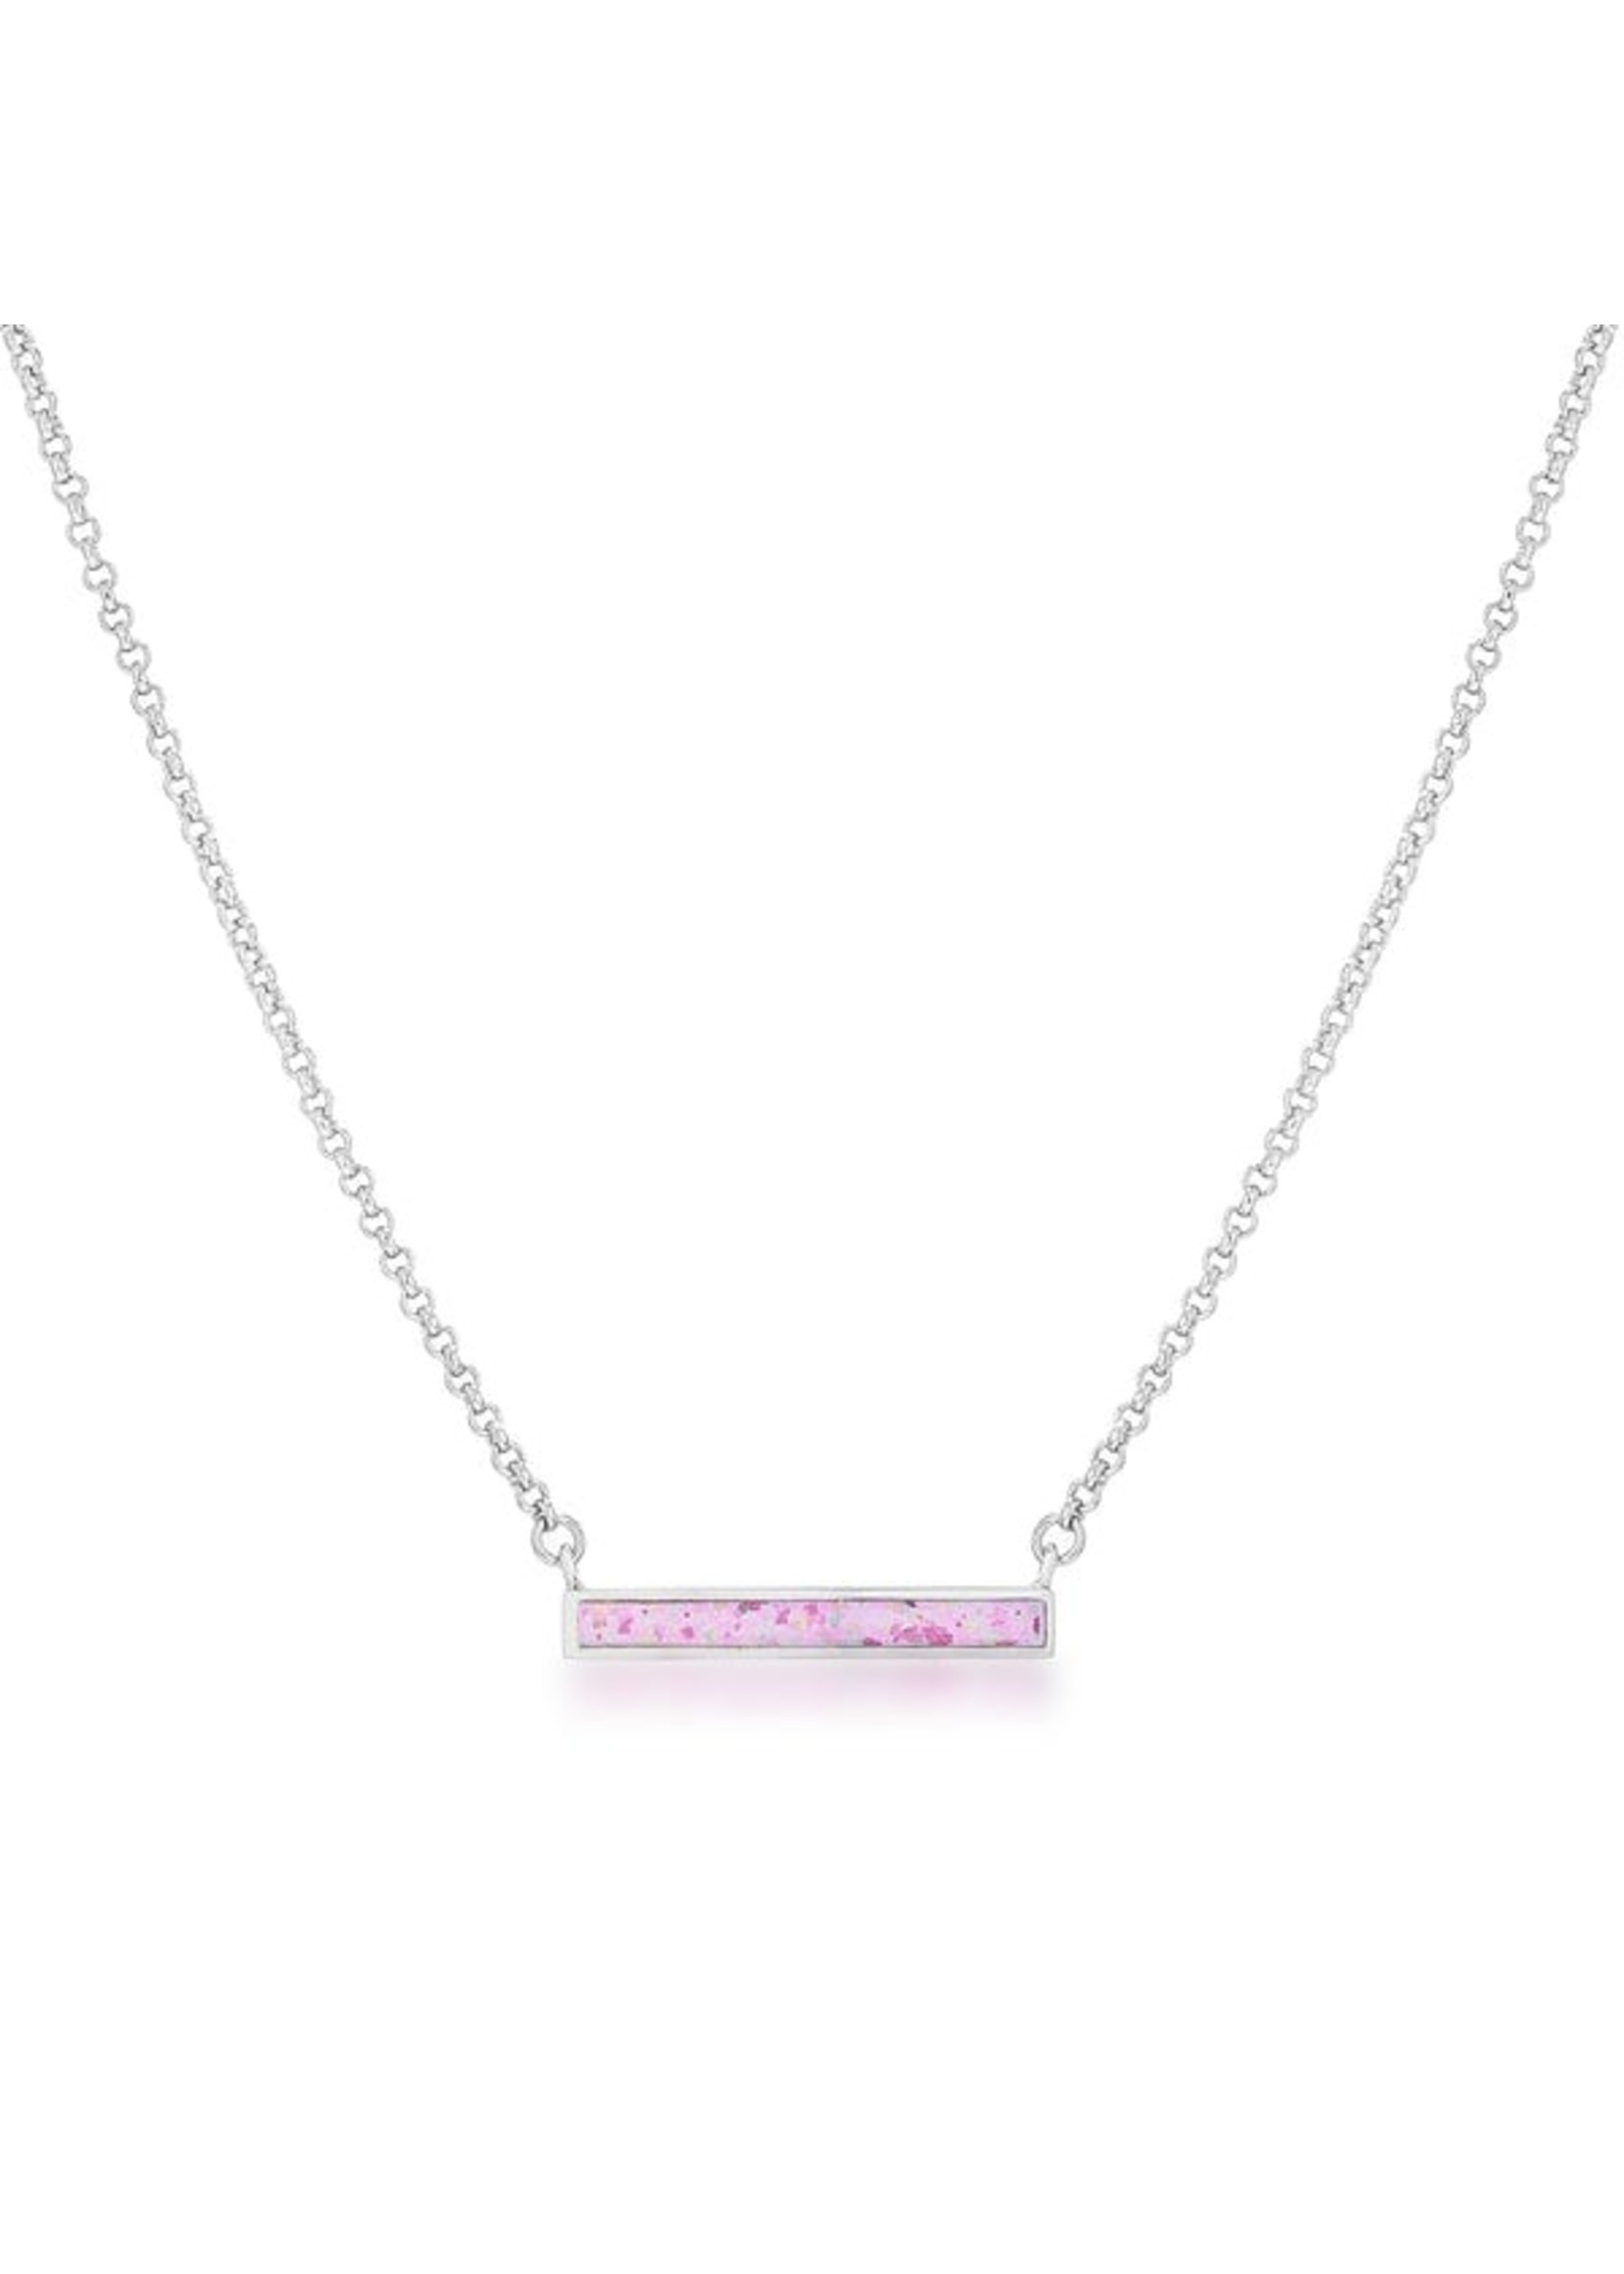 KDesign Regal Collection Rhodium Plated Bar Necklace